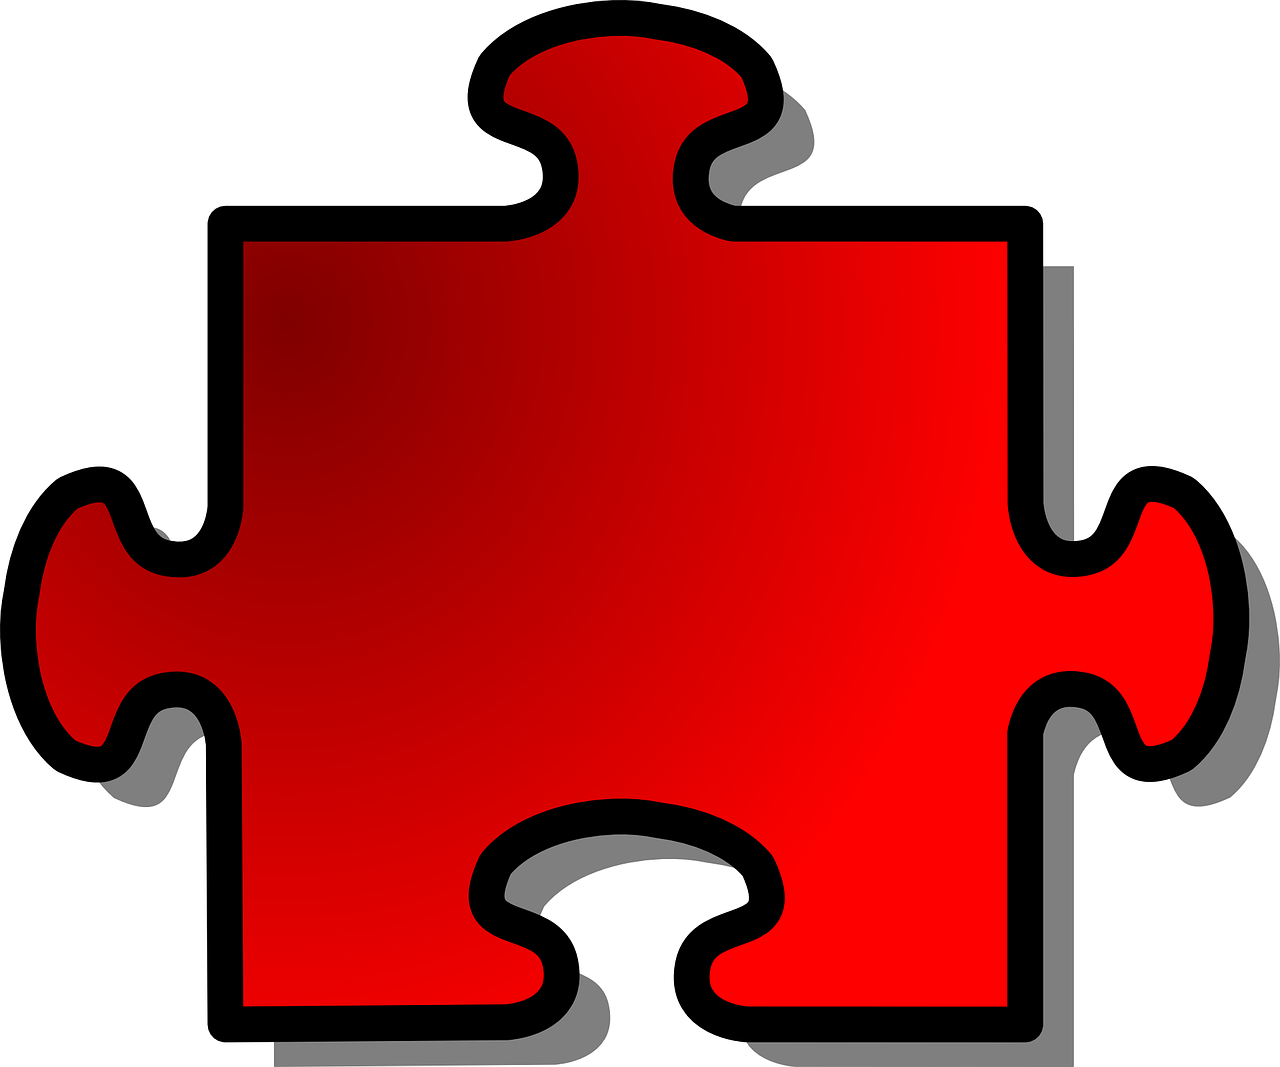 jigsaw,puzzle,piece,shape,red,join,part,connect,solution,challenge,free vector graphics,free pictures, free photos, free images, royalty free, free illustrations, public domain